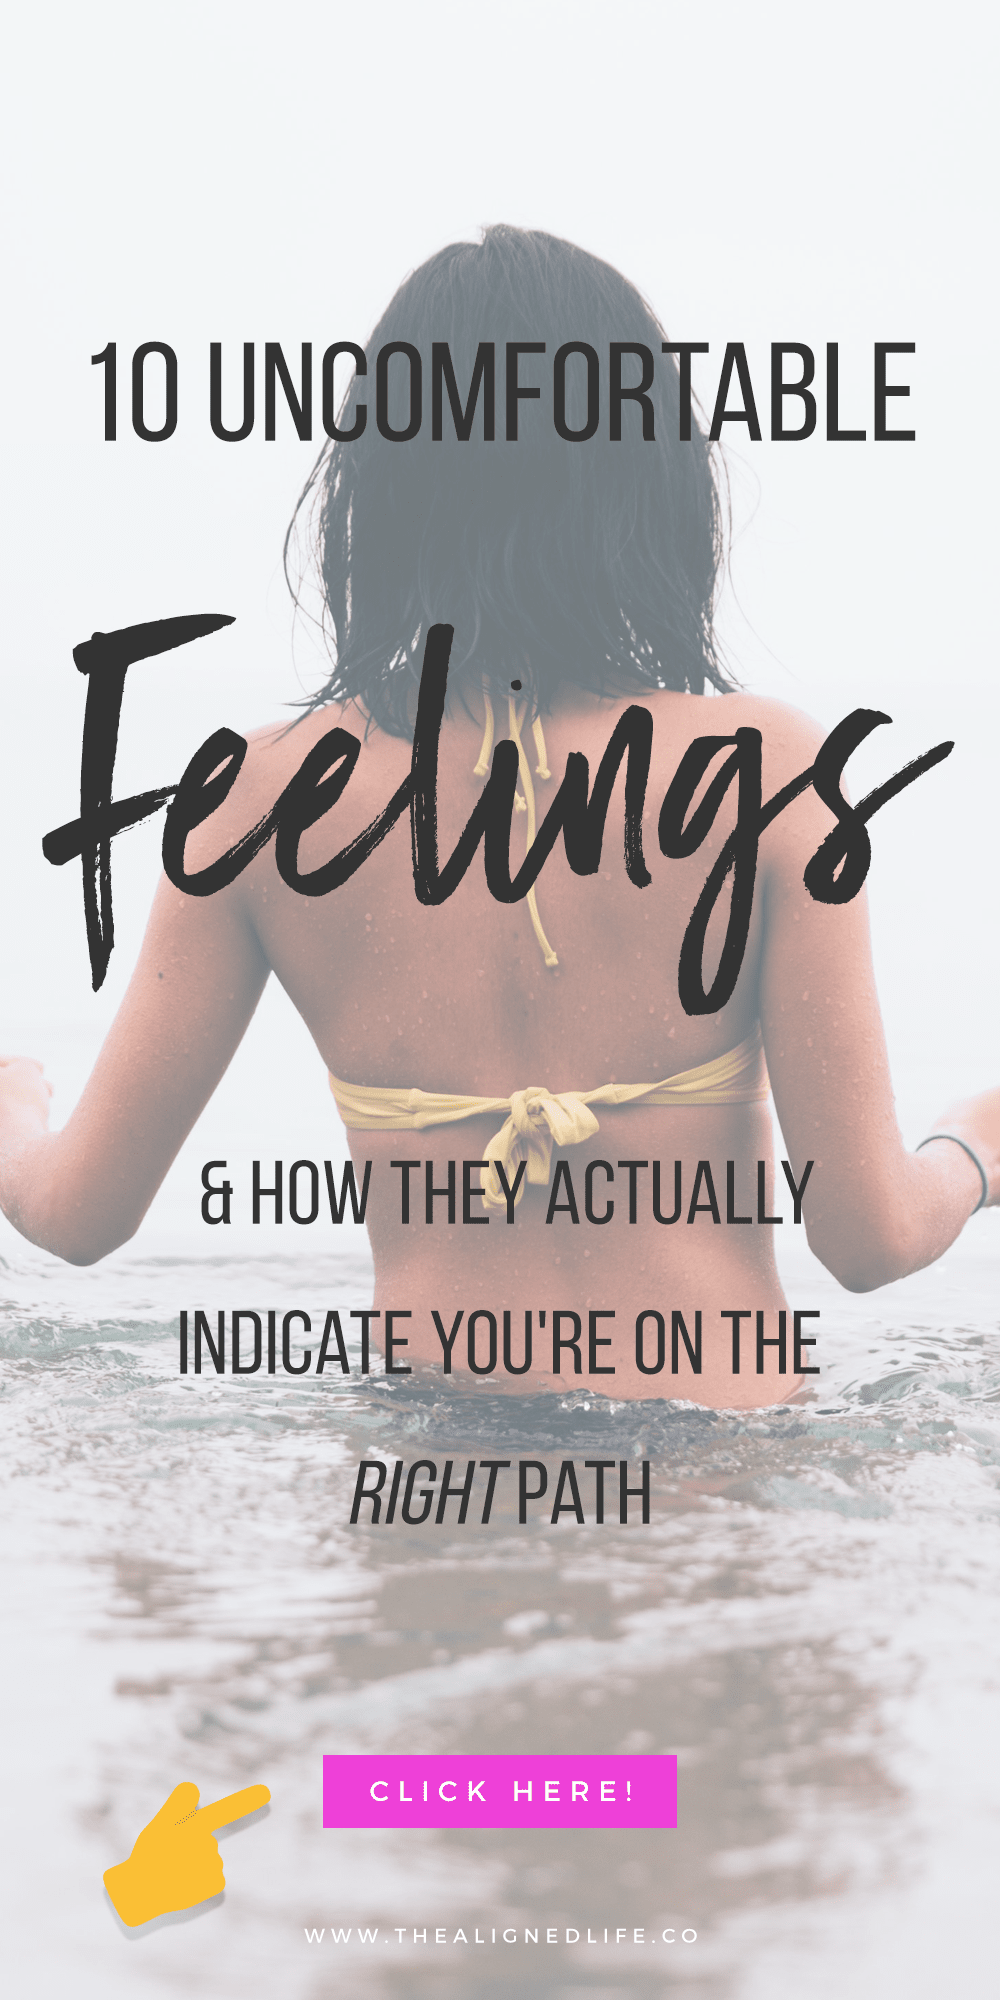 10 Uncomfortable Feelings & How They Actually Indicate You're On The Right Path